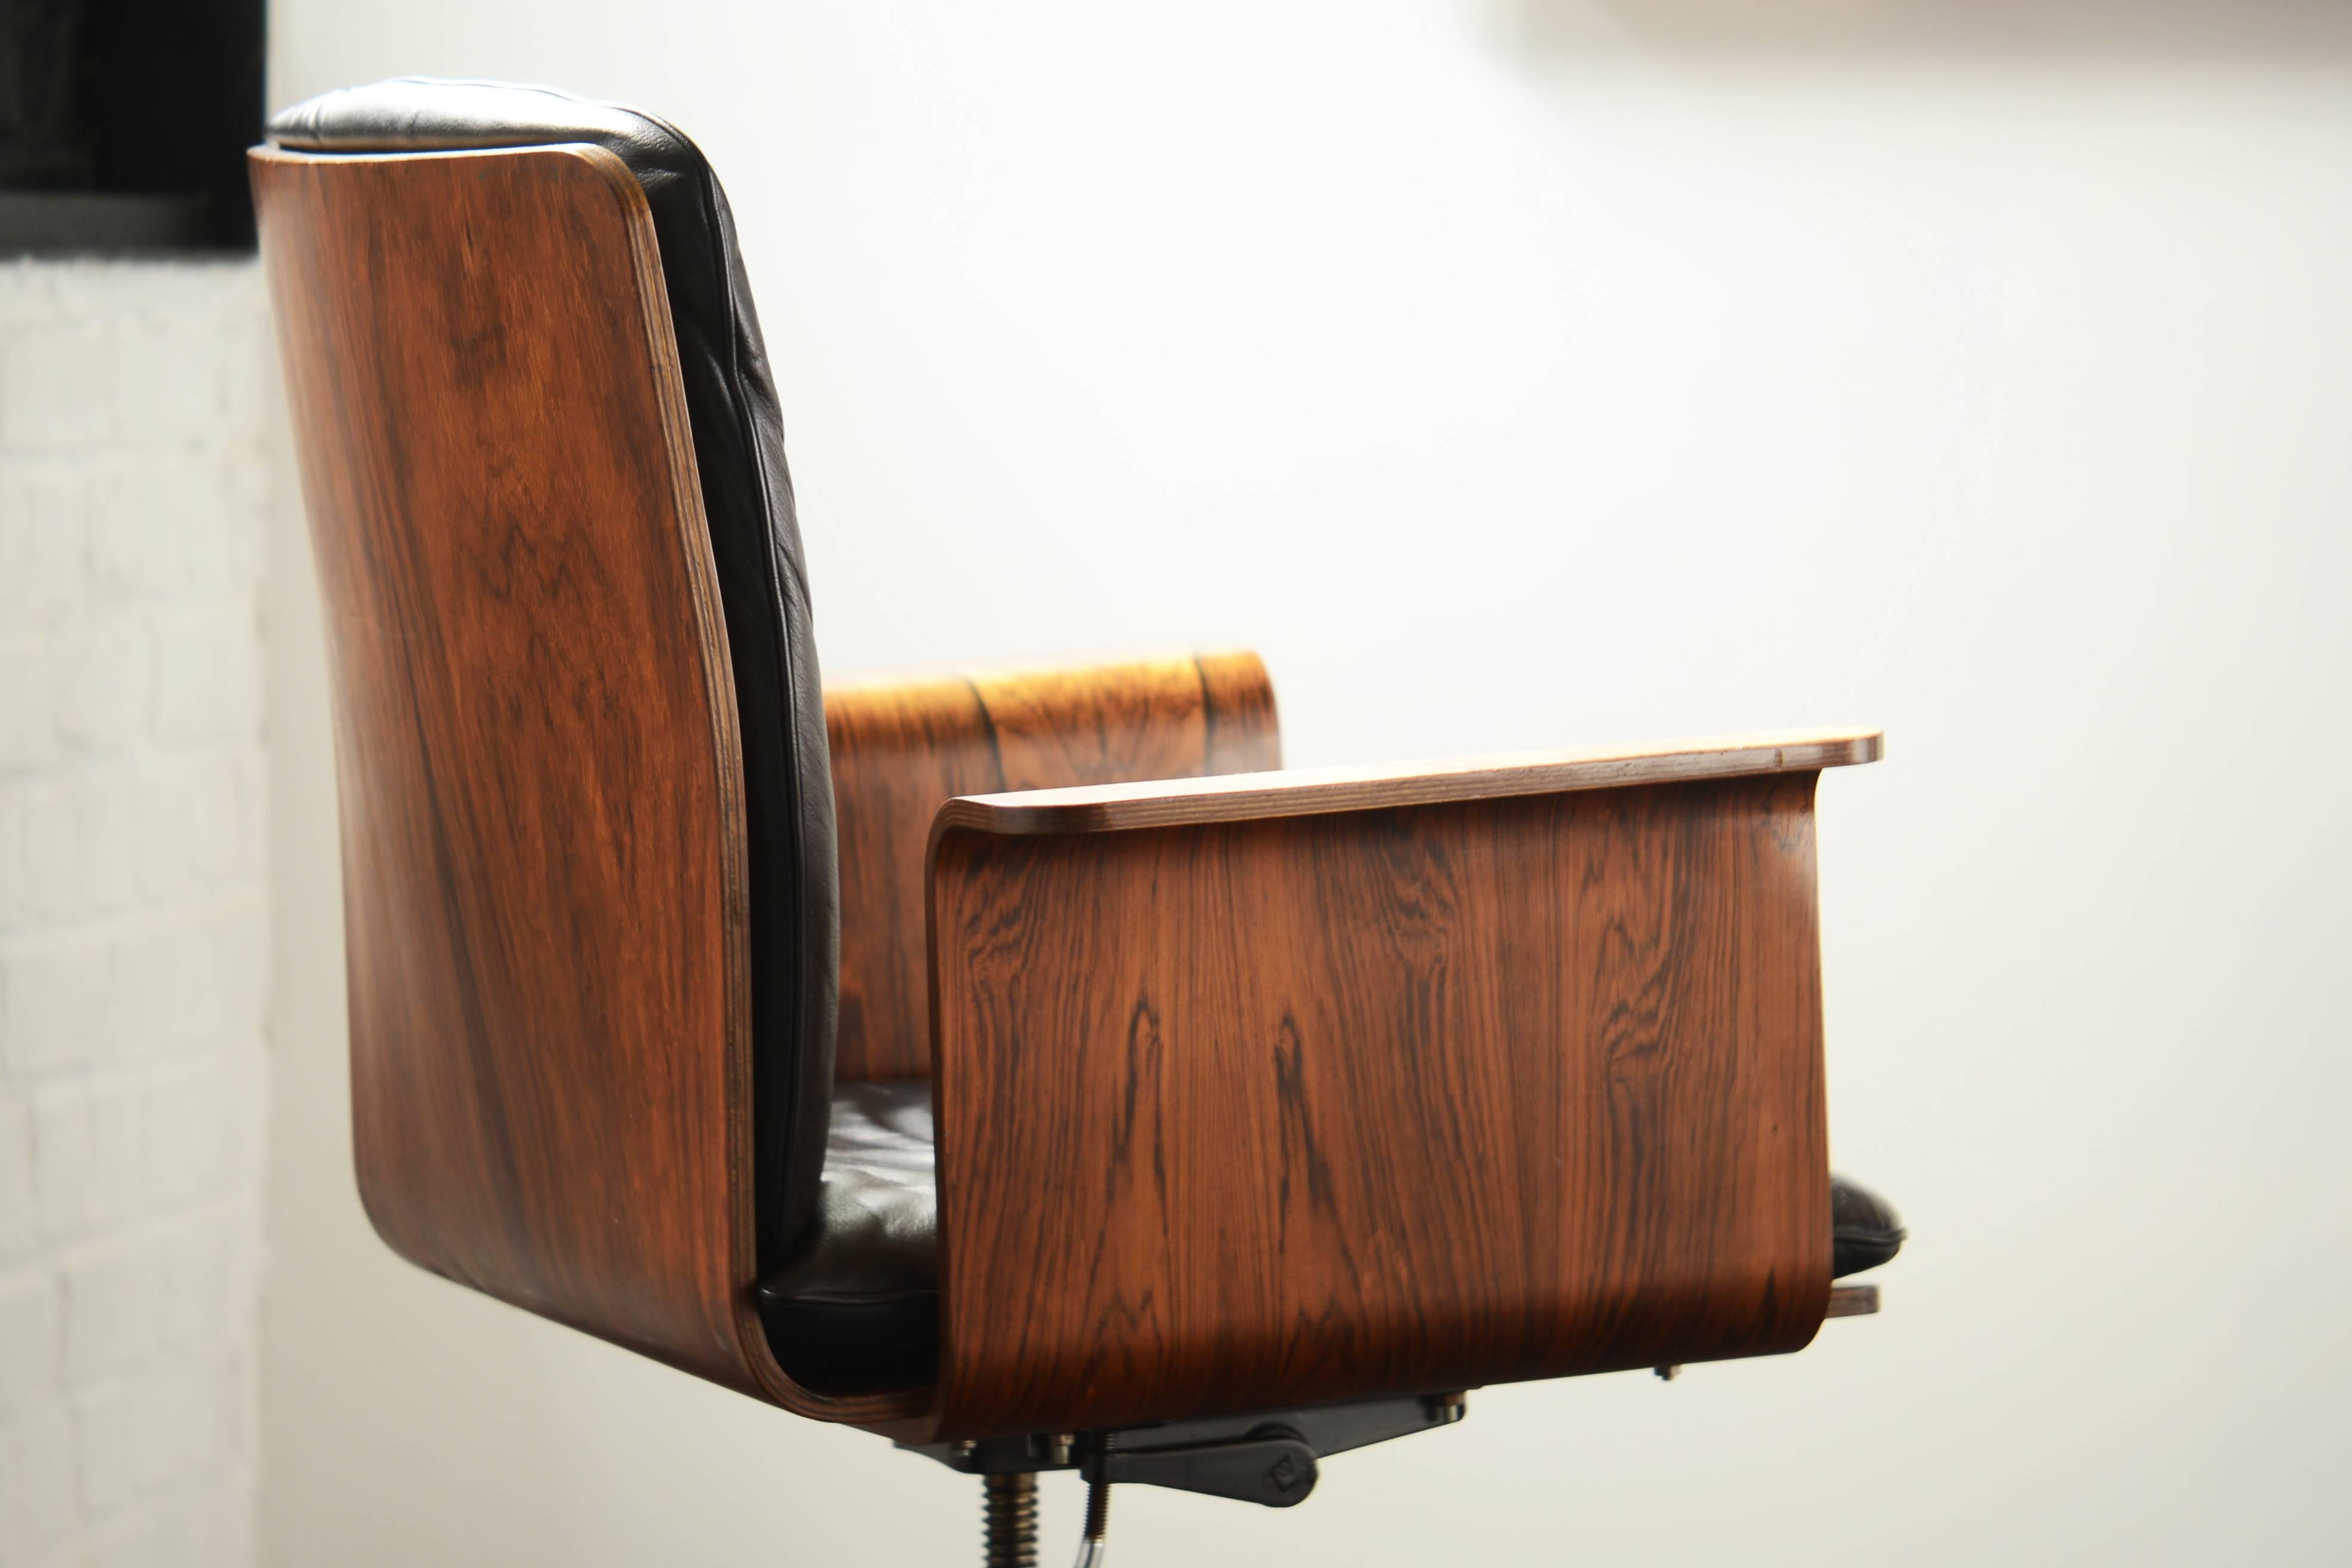 Comfortable rosewood and black leather desk chair on wheels. Reclinable and adjustable in height. In very good condition. Nice rosewood desk by Jorgen Hoj to match.